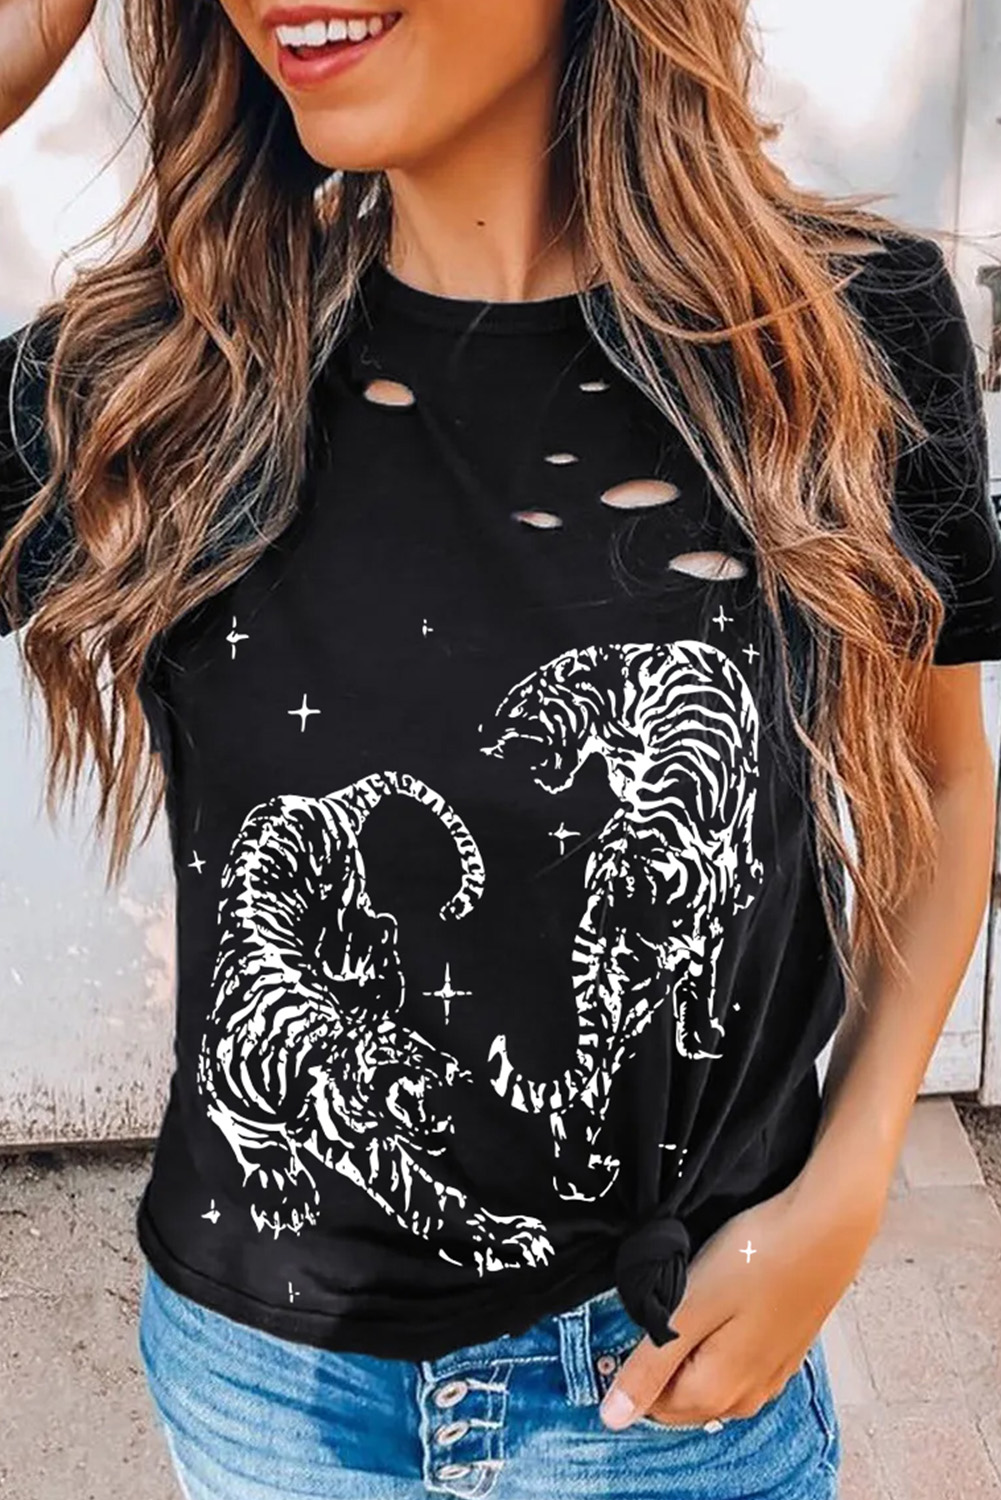 Shewin Wholesale Lady Black Tiger Graphic Cut Out Distressed O Neck T SHIRT